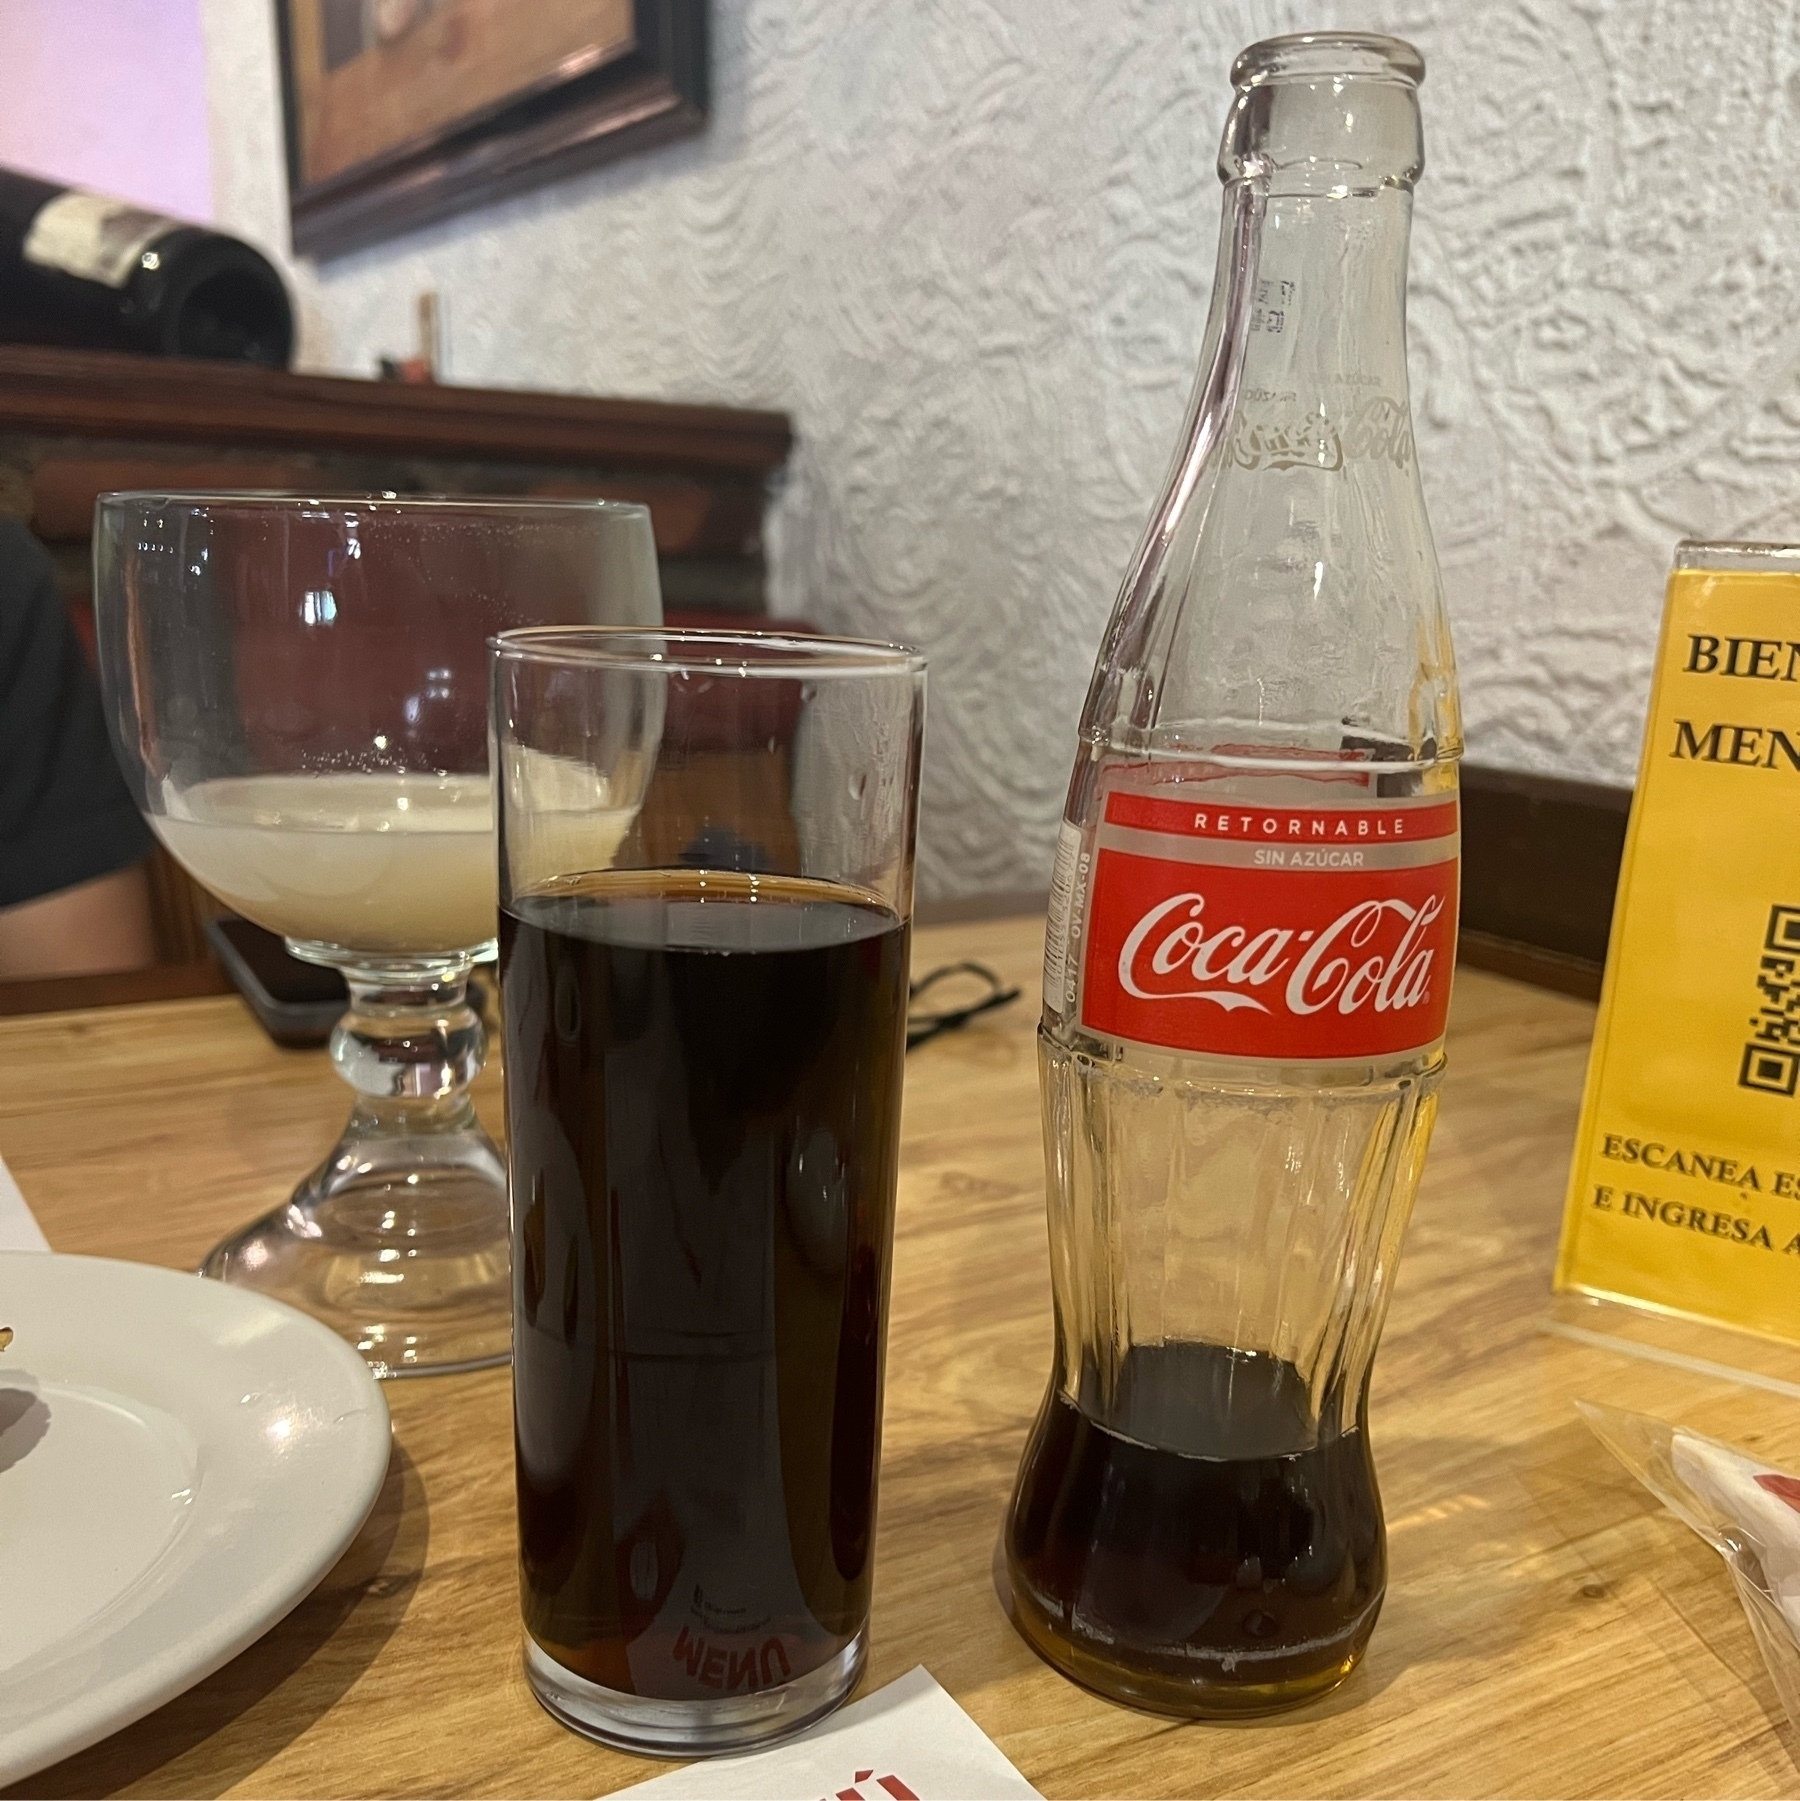 Horchata in the background; glass of Coke Zero in the foreground.